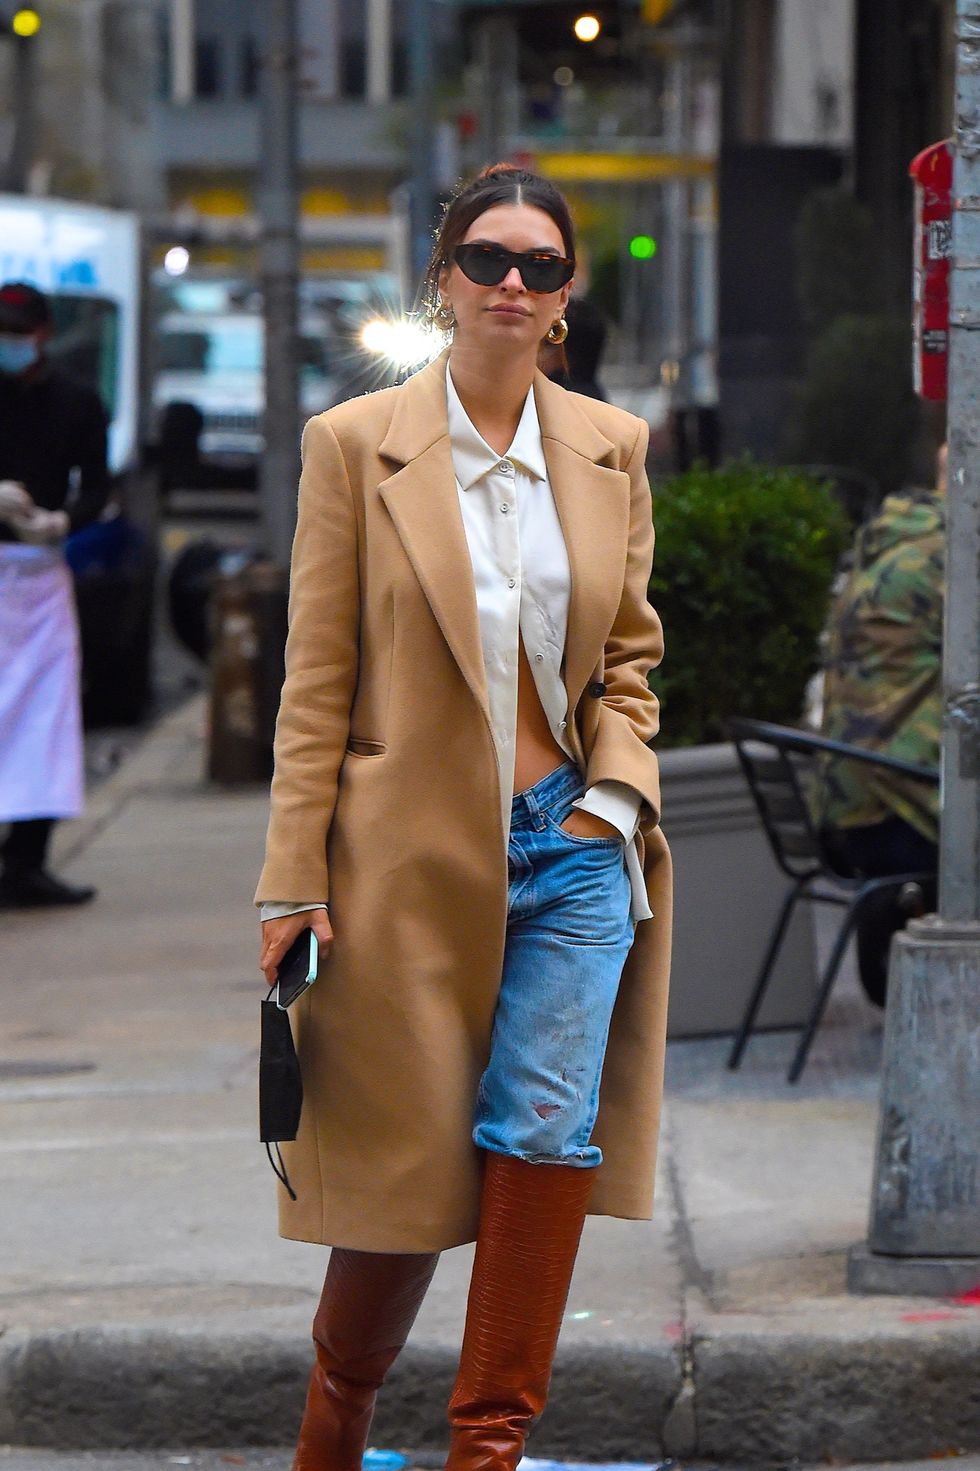 Style Notes: Lily Collins' classic camel coat